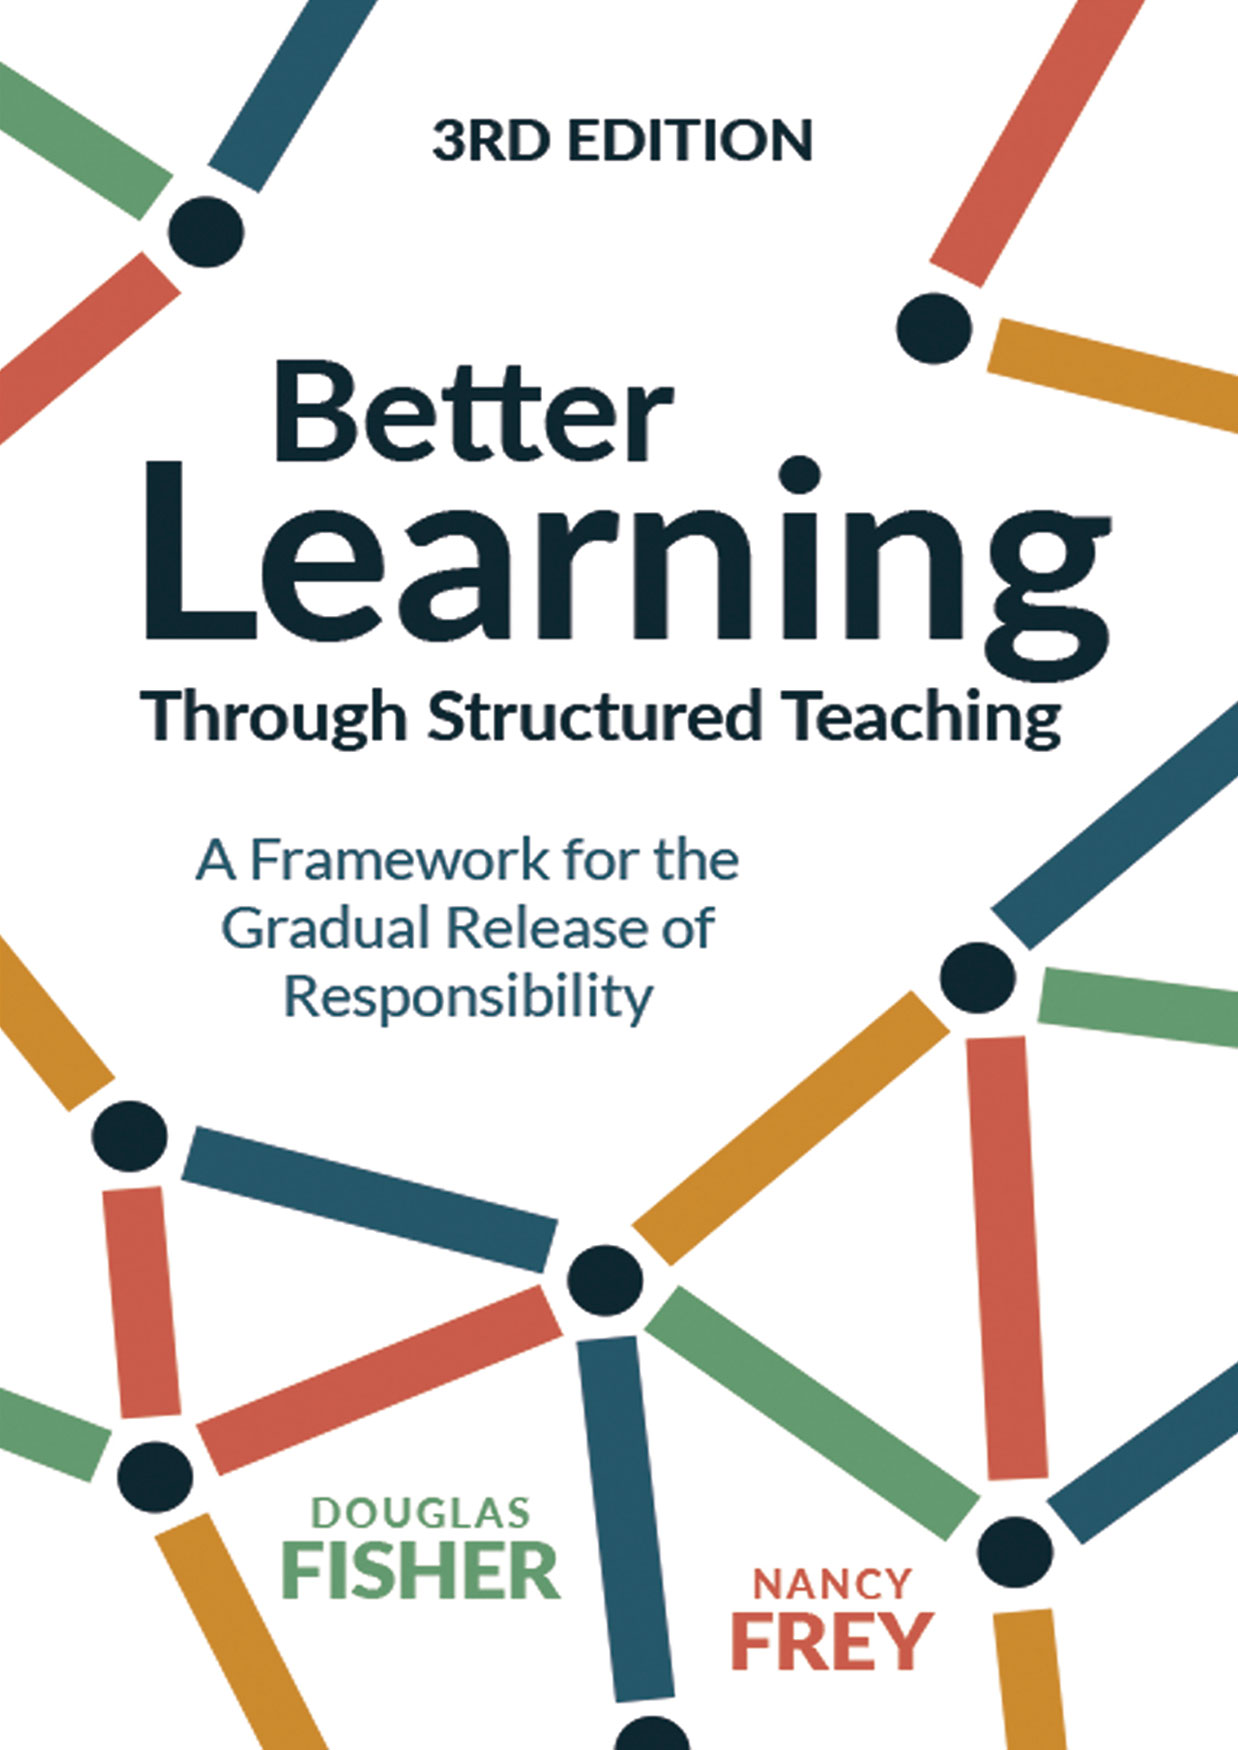 Better Learning Through Structured Teaching: A Framework for the Gradual Release of Responsibility, 3rd Edition